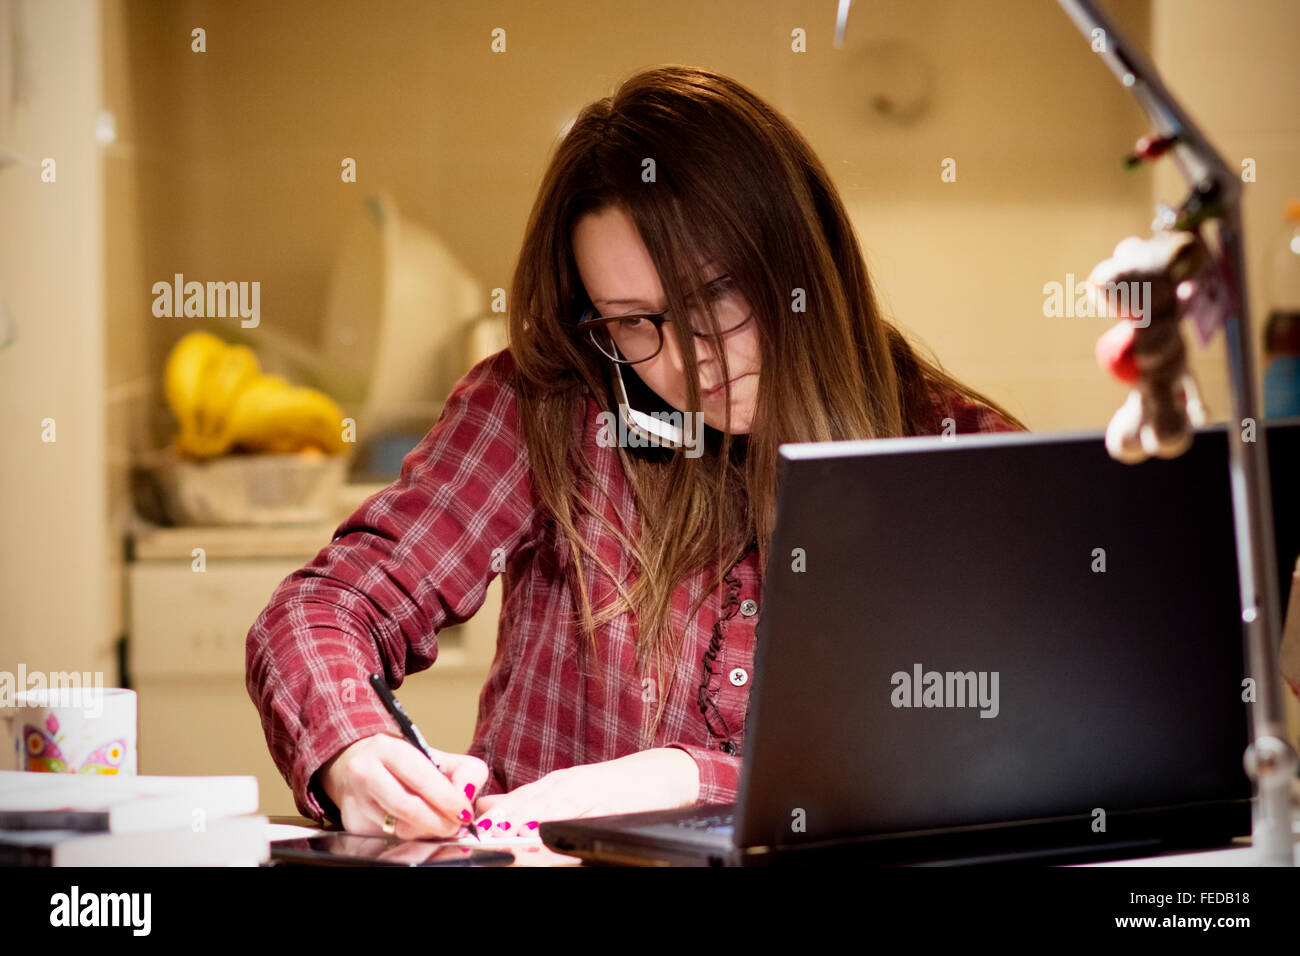 Young housewife paying bills online late in the evening after finishing all her house work, sitting at the desk with computer, b Stock Photo